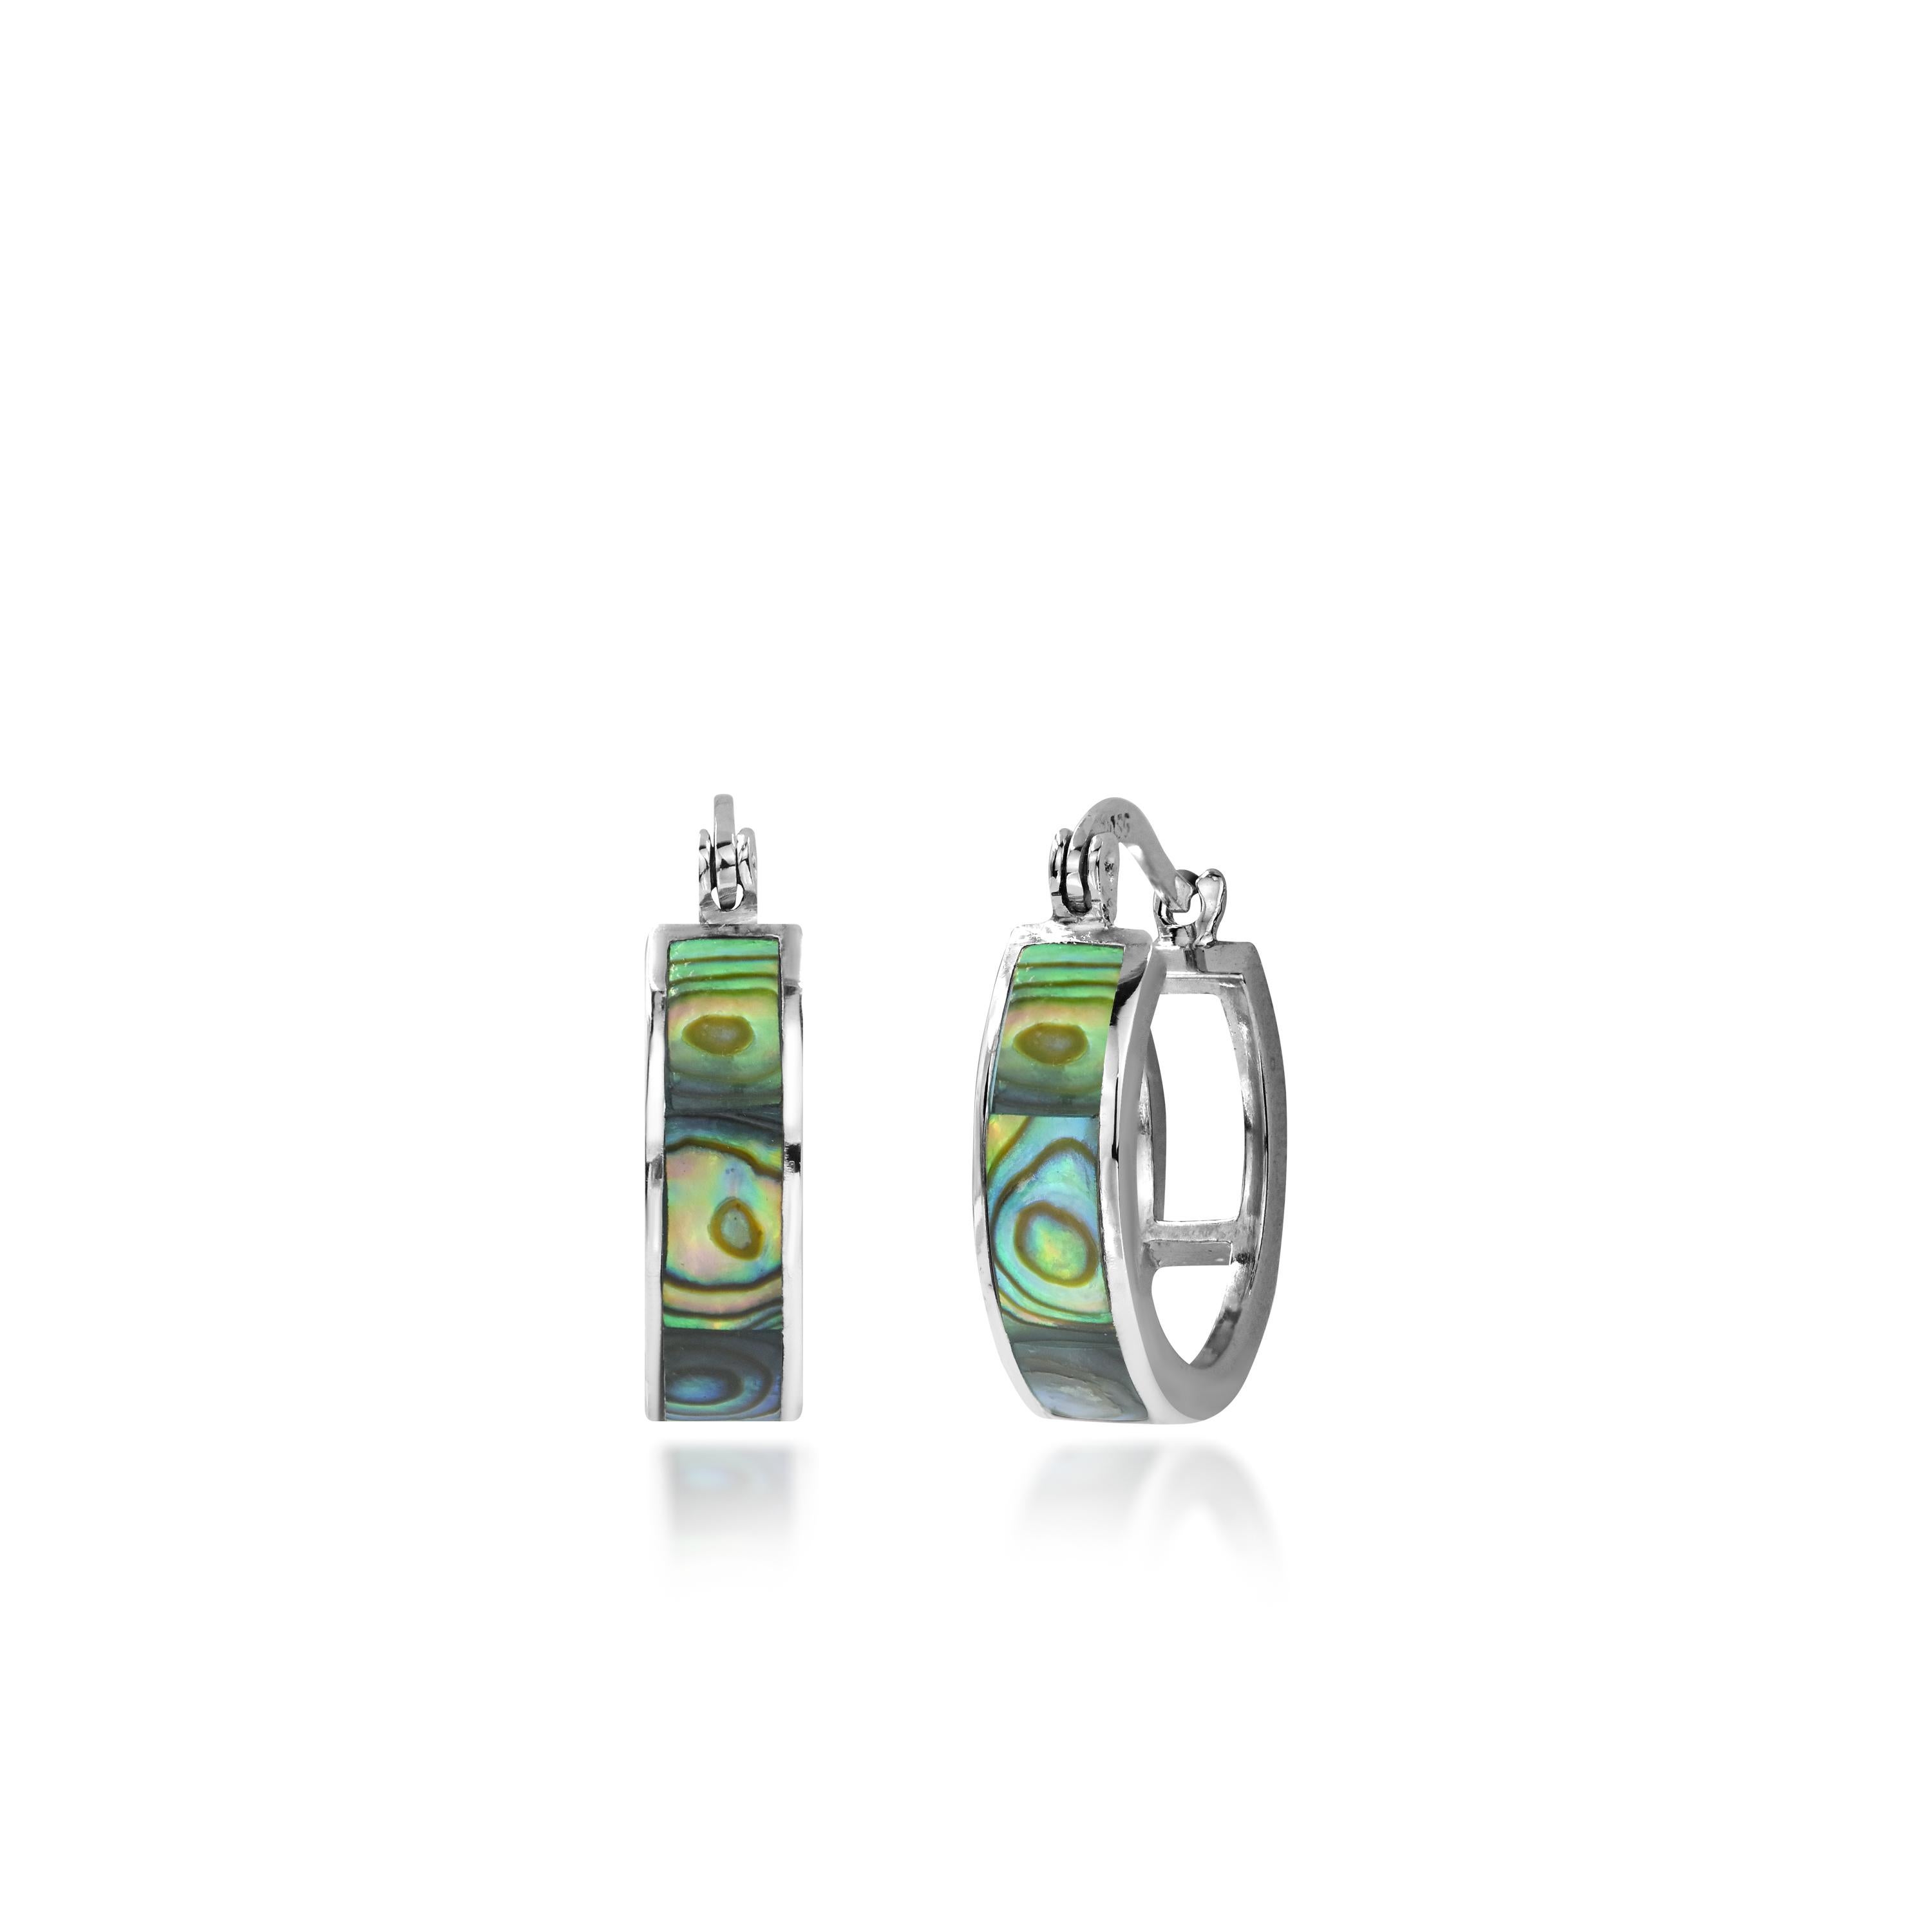 Upgrade your style with these stylish 18K genuine gold filled abalone hinge hoop earrings. The beautiful abalone shell adds a touch of natural beauty, while the hinge design ensures a secure and comfortable fit. These earrings are both trendy and